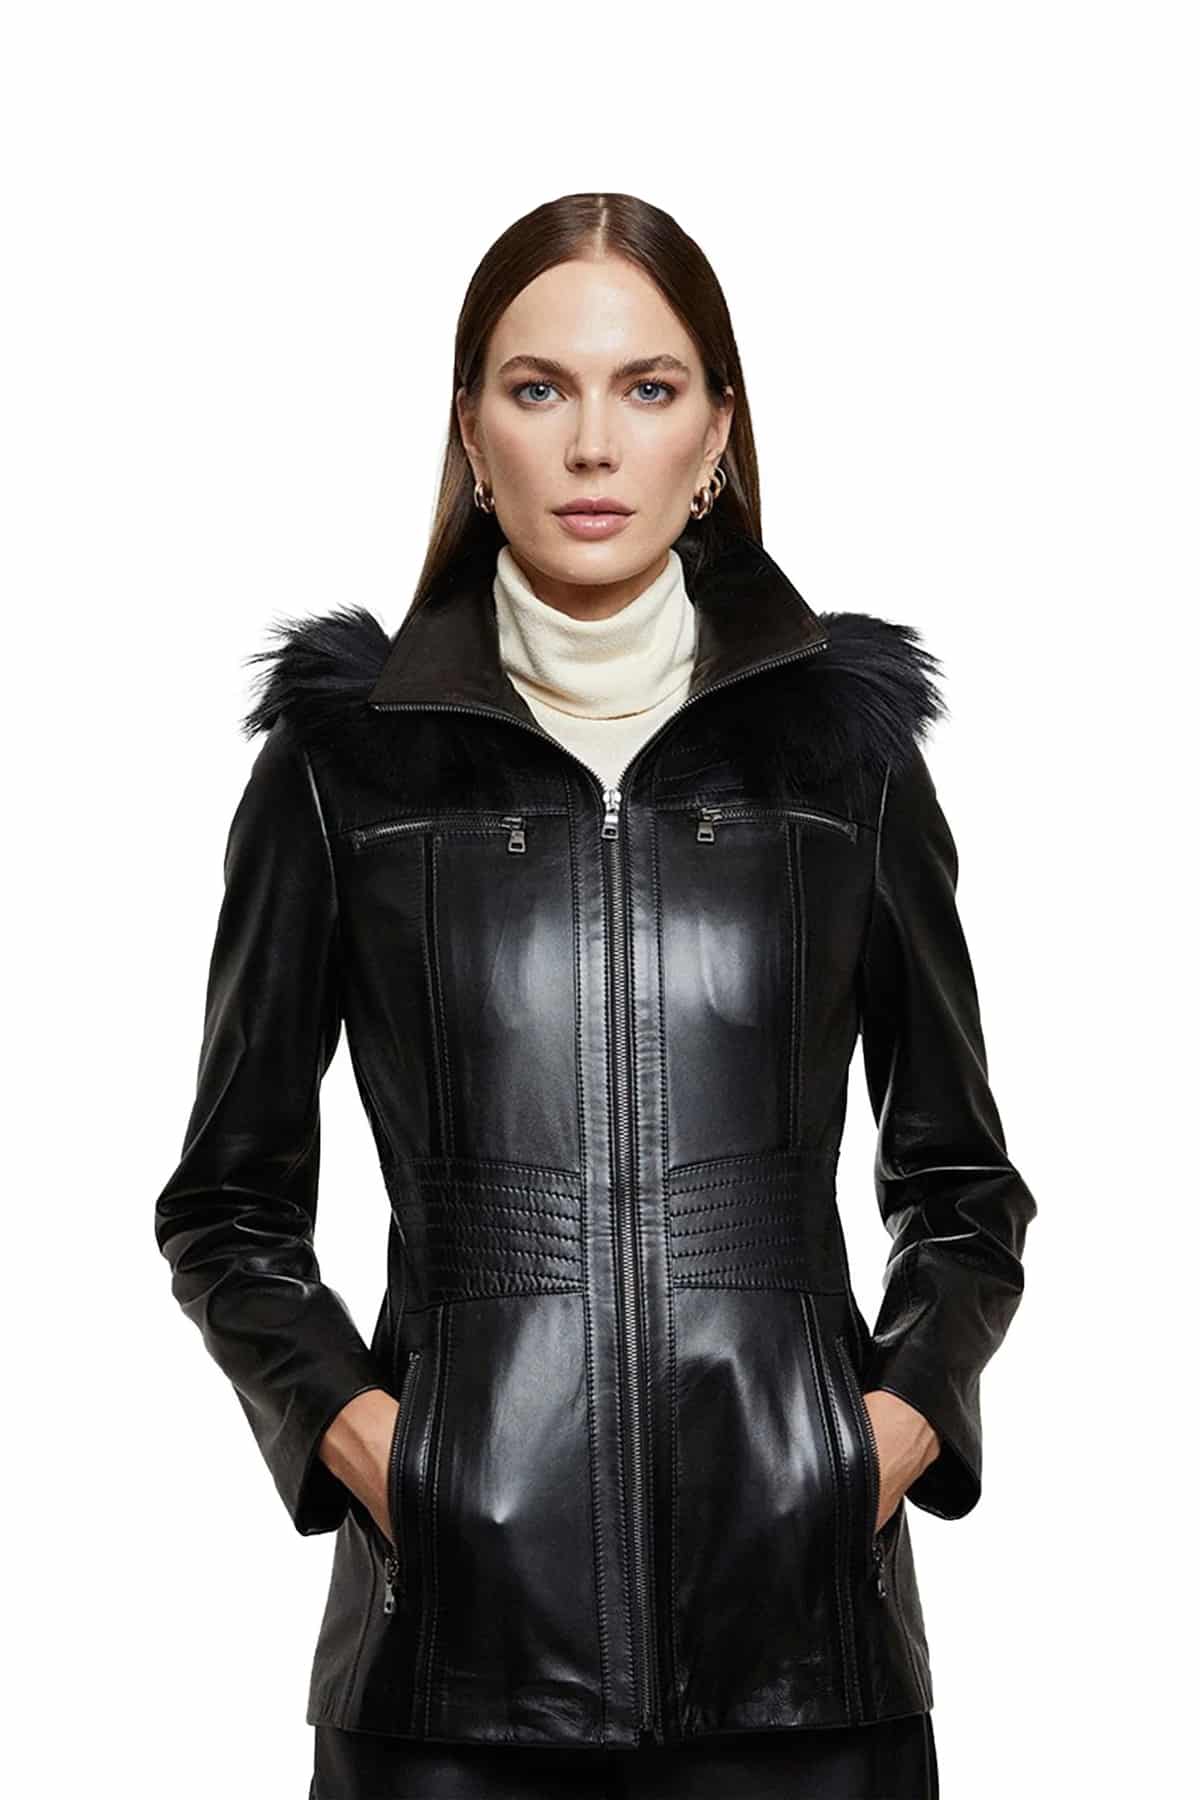 Looking for Black Fur Hooded Leather Coat Womens?